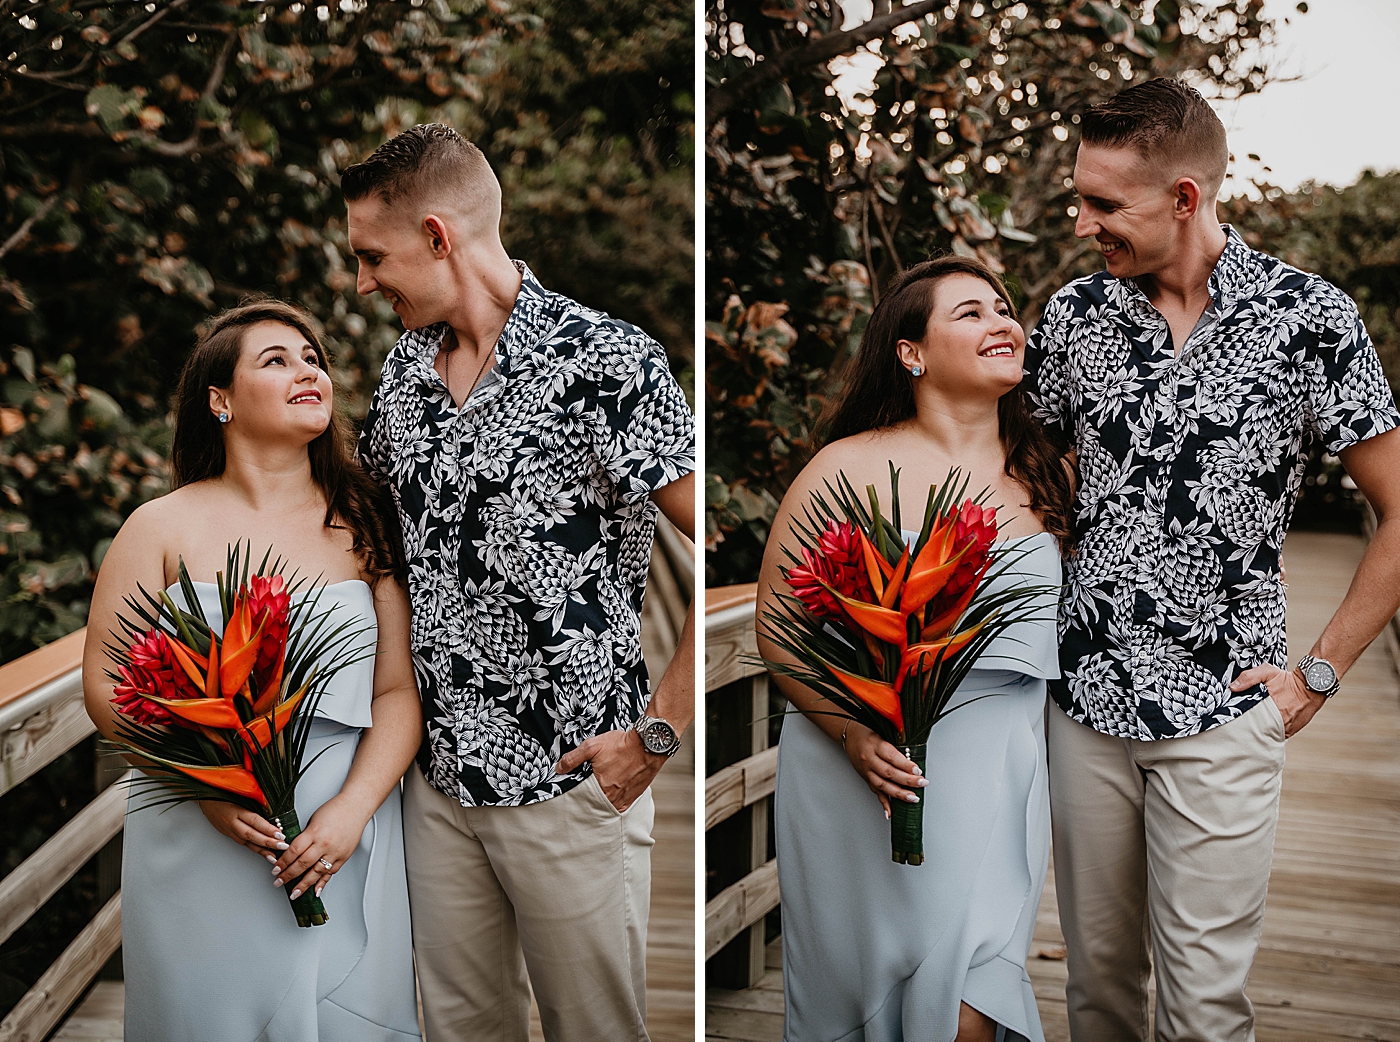 Couple with beautiful bright red bouquet South Florida Beach Photography captured by Krystal Capone Photography